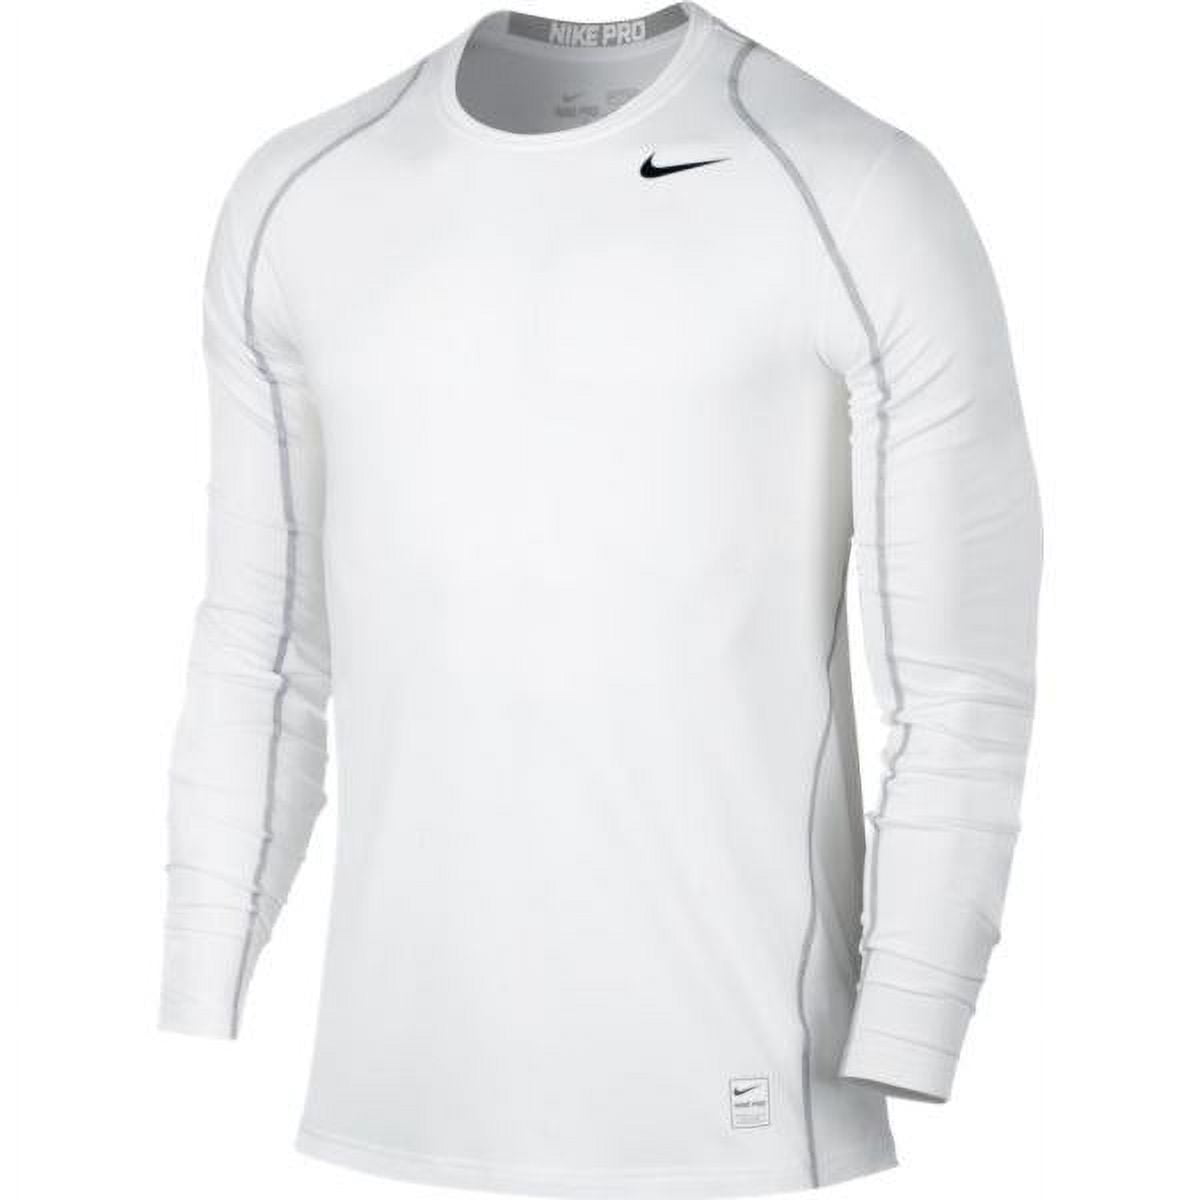 Nike Dri-Fit Men's Pro Cool Fitted Long Sleeve Shirt 703100-100 White 